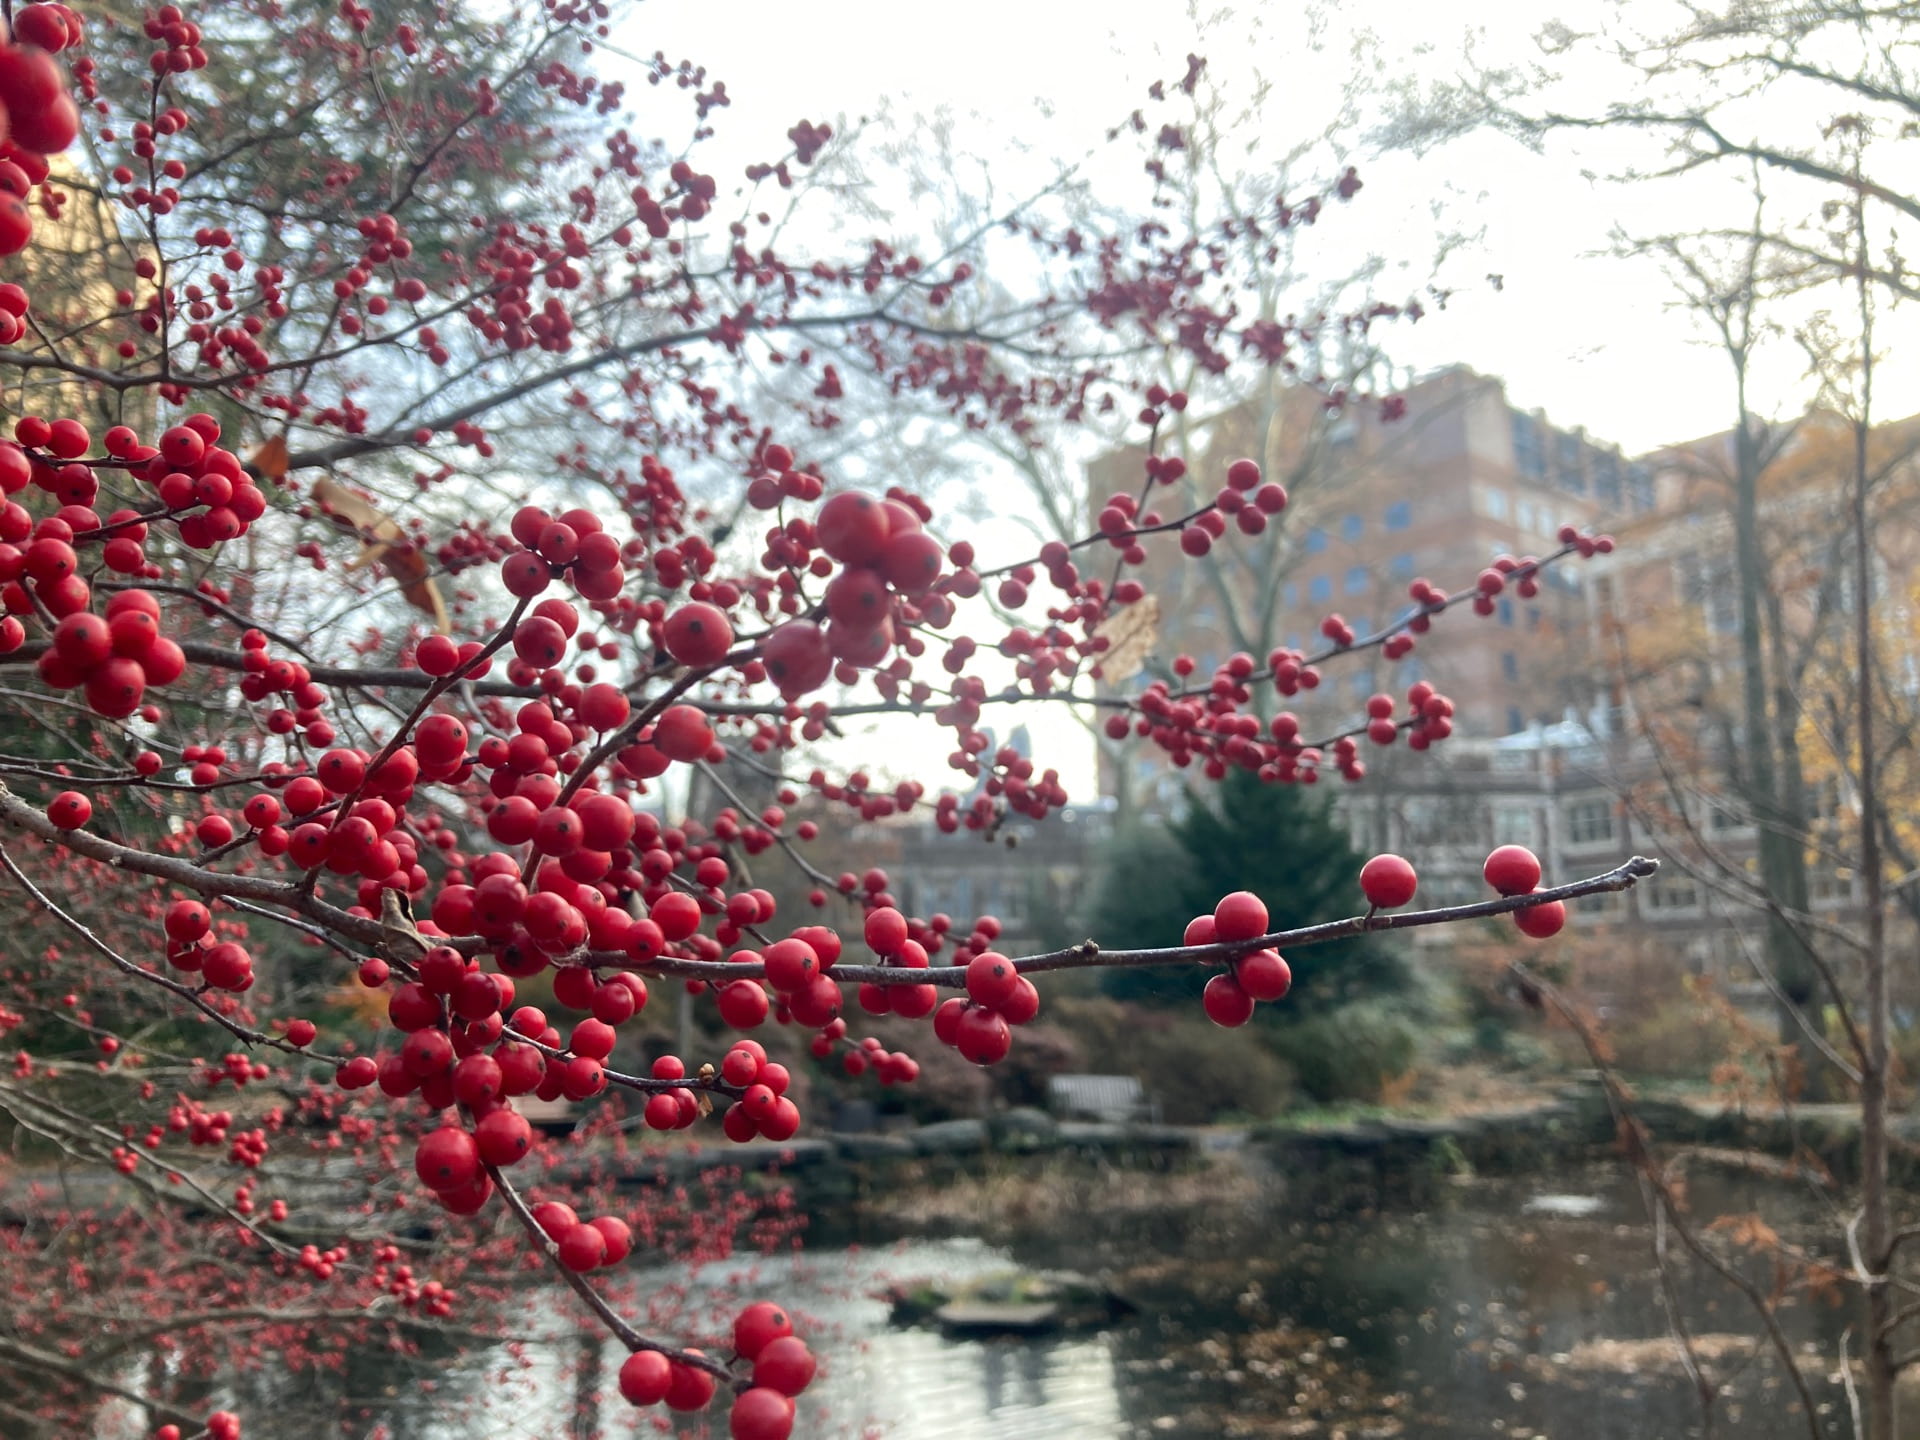 Ilex verticillata fruits in the foreground of the Pond and Woods Garden.